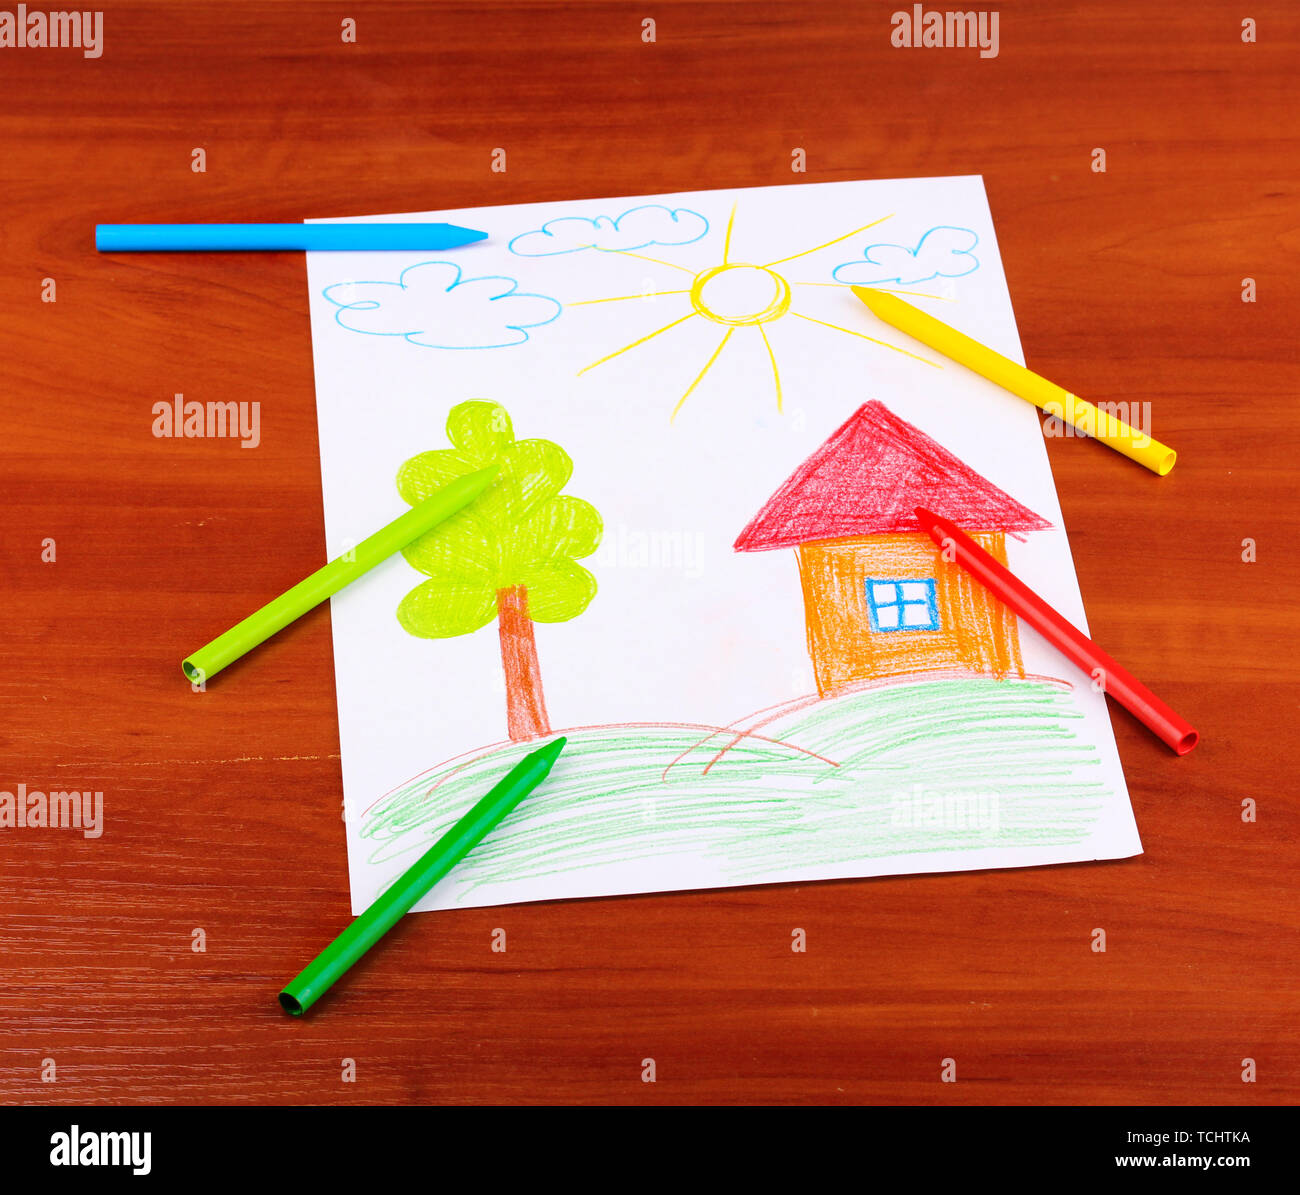 Kids drawing of family and colored pencils on wooden table Stock Photo -  Alamy